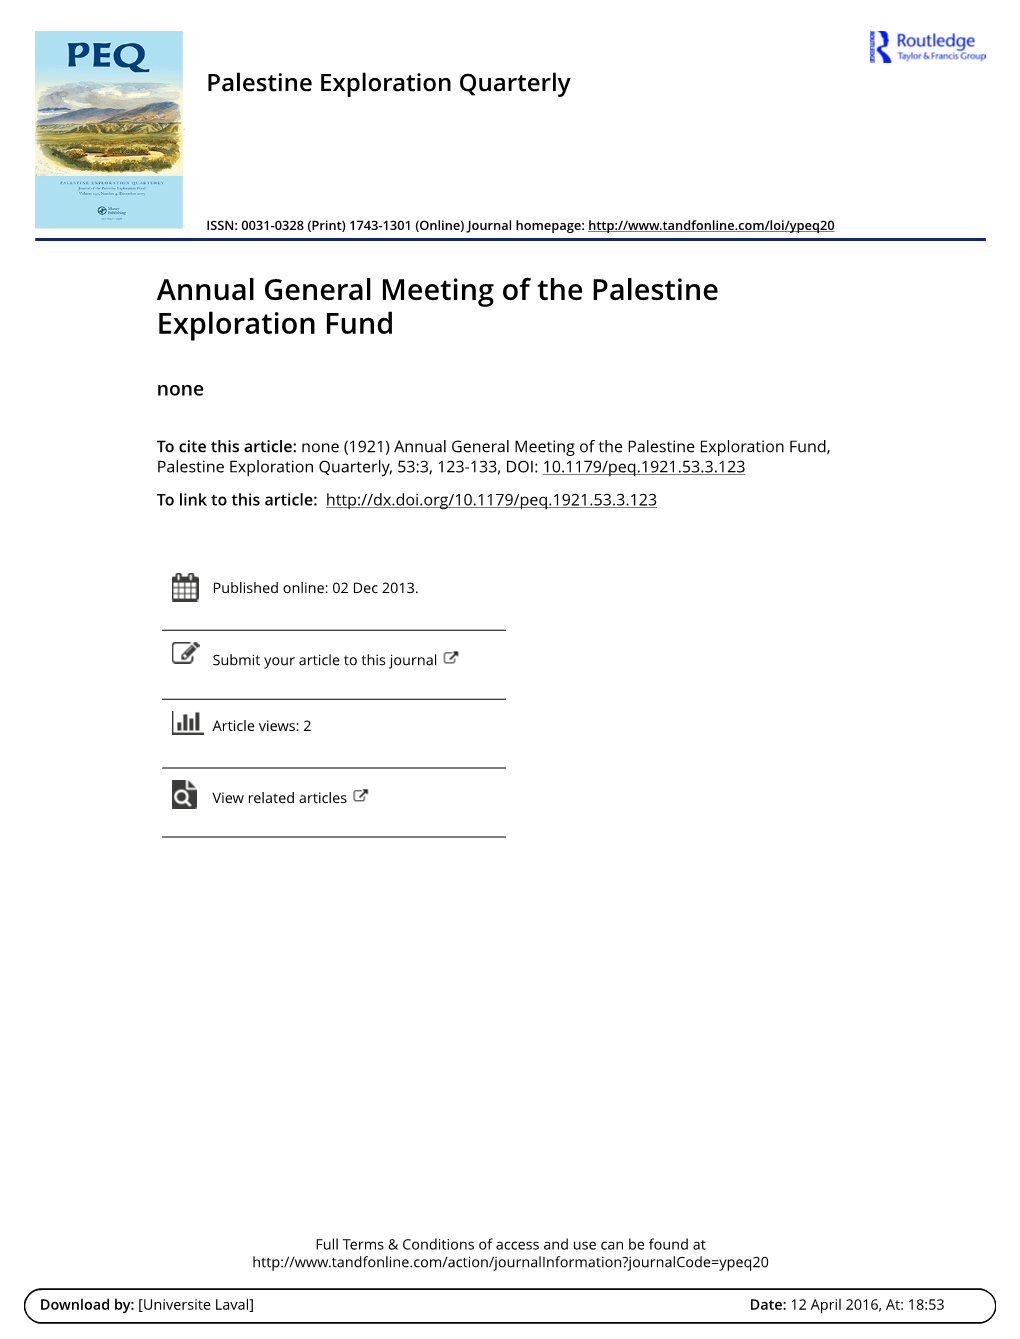 Annual General Meeting of the Palestine Exploration Fund